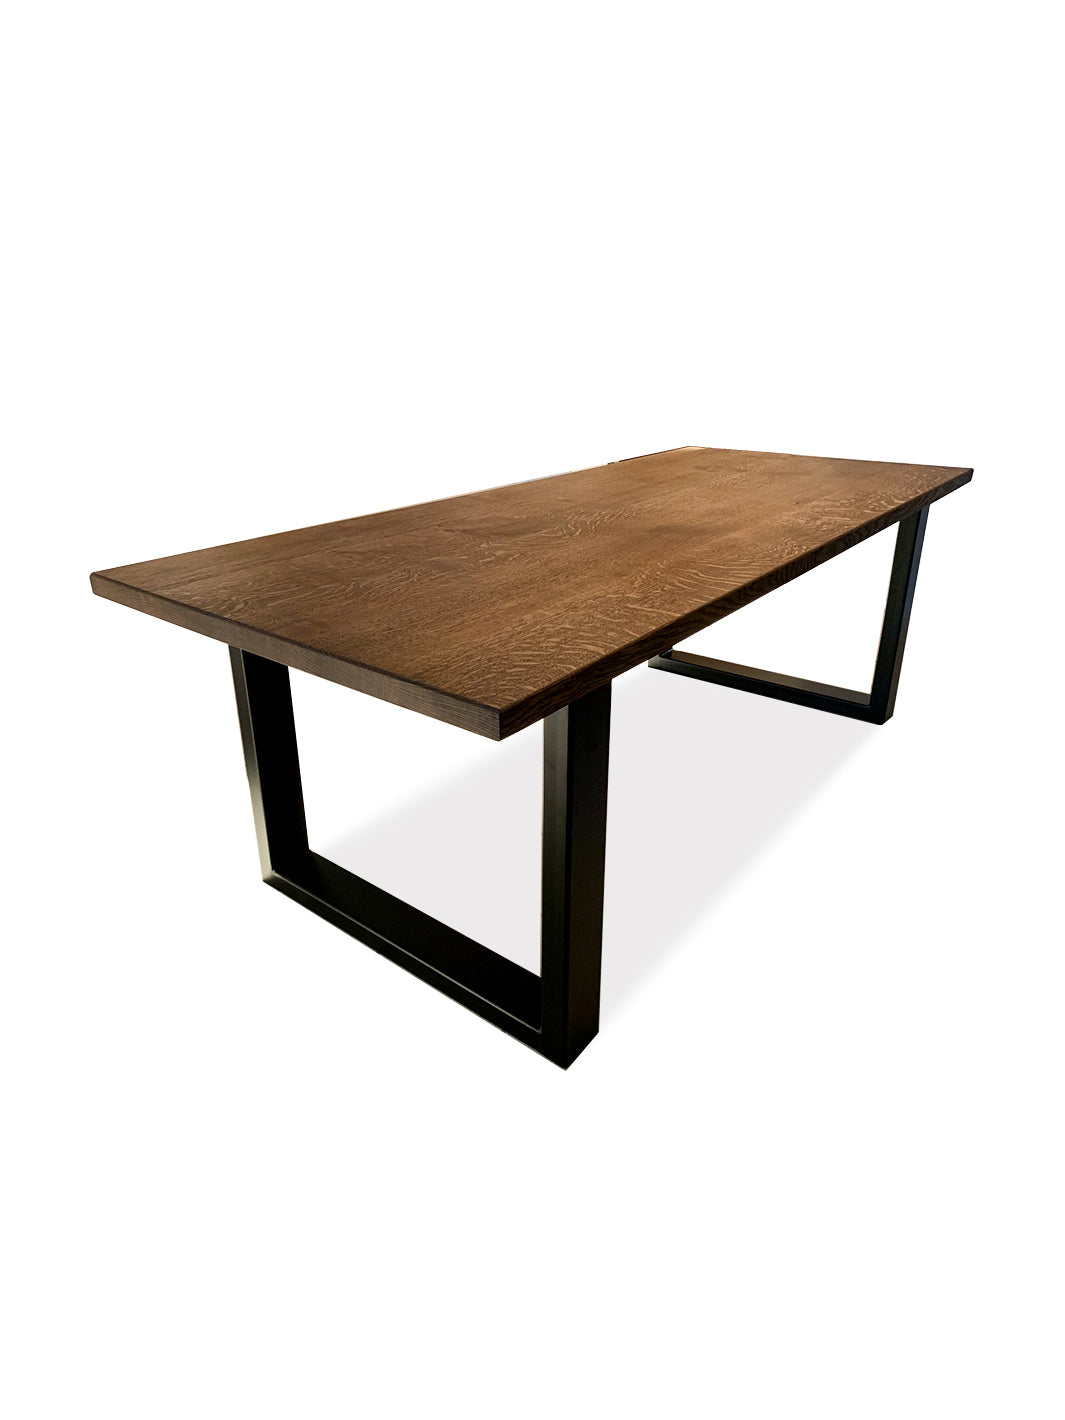 Modern Quartersawn White Oak Dining Table with Black Square Steel Legs Earthly Comfort Dining Tables 685